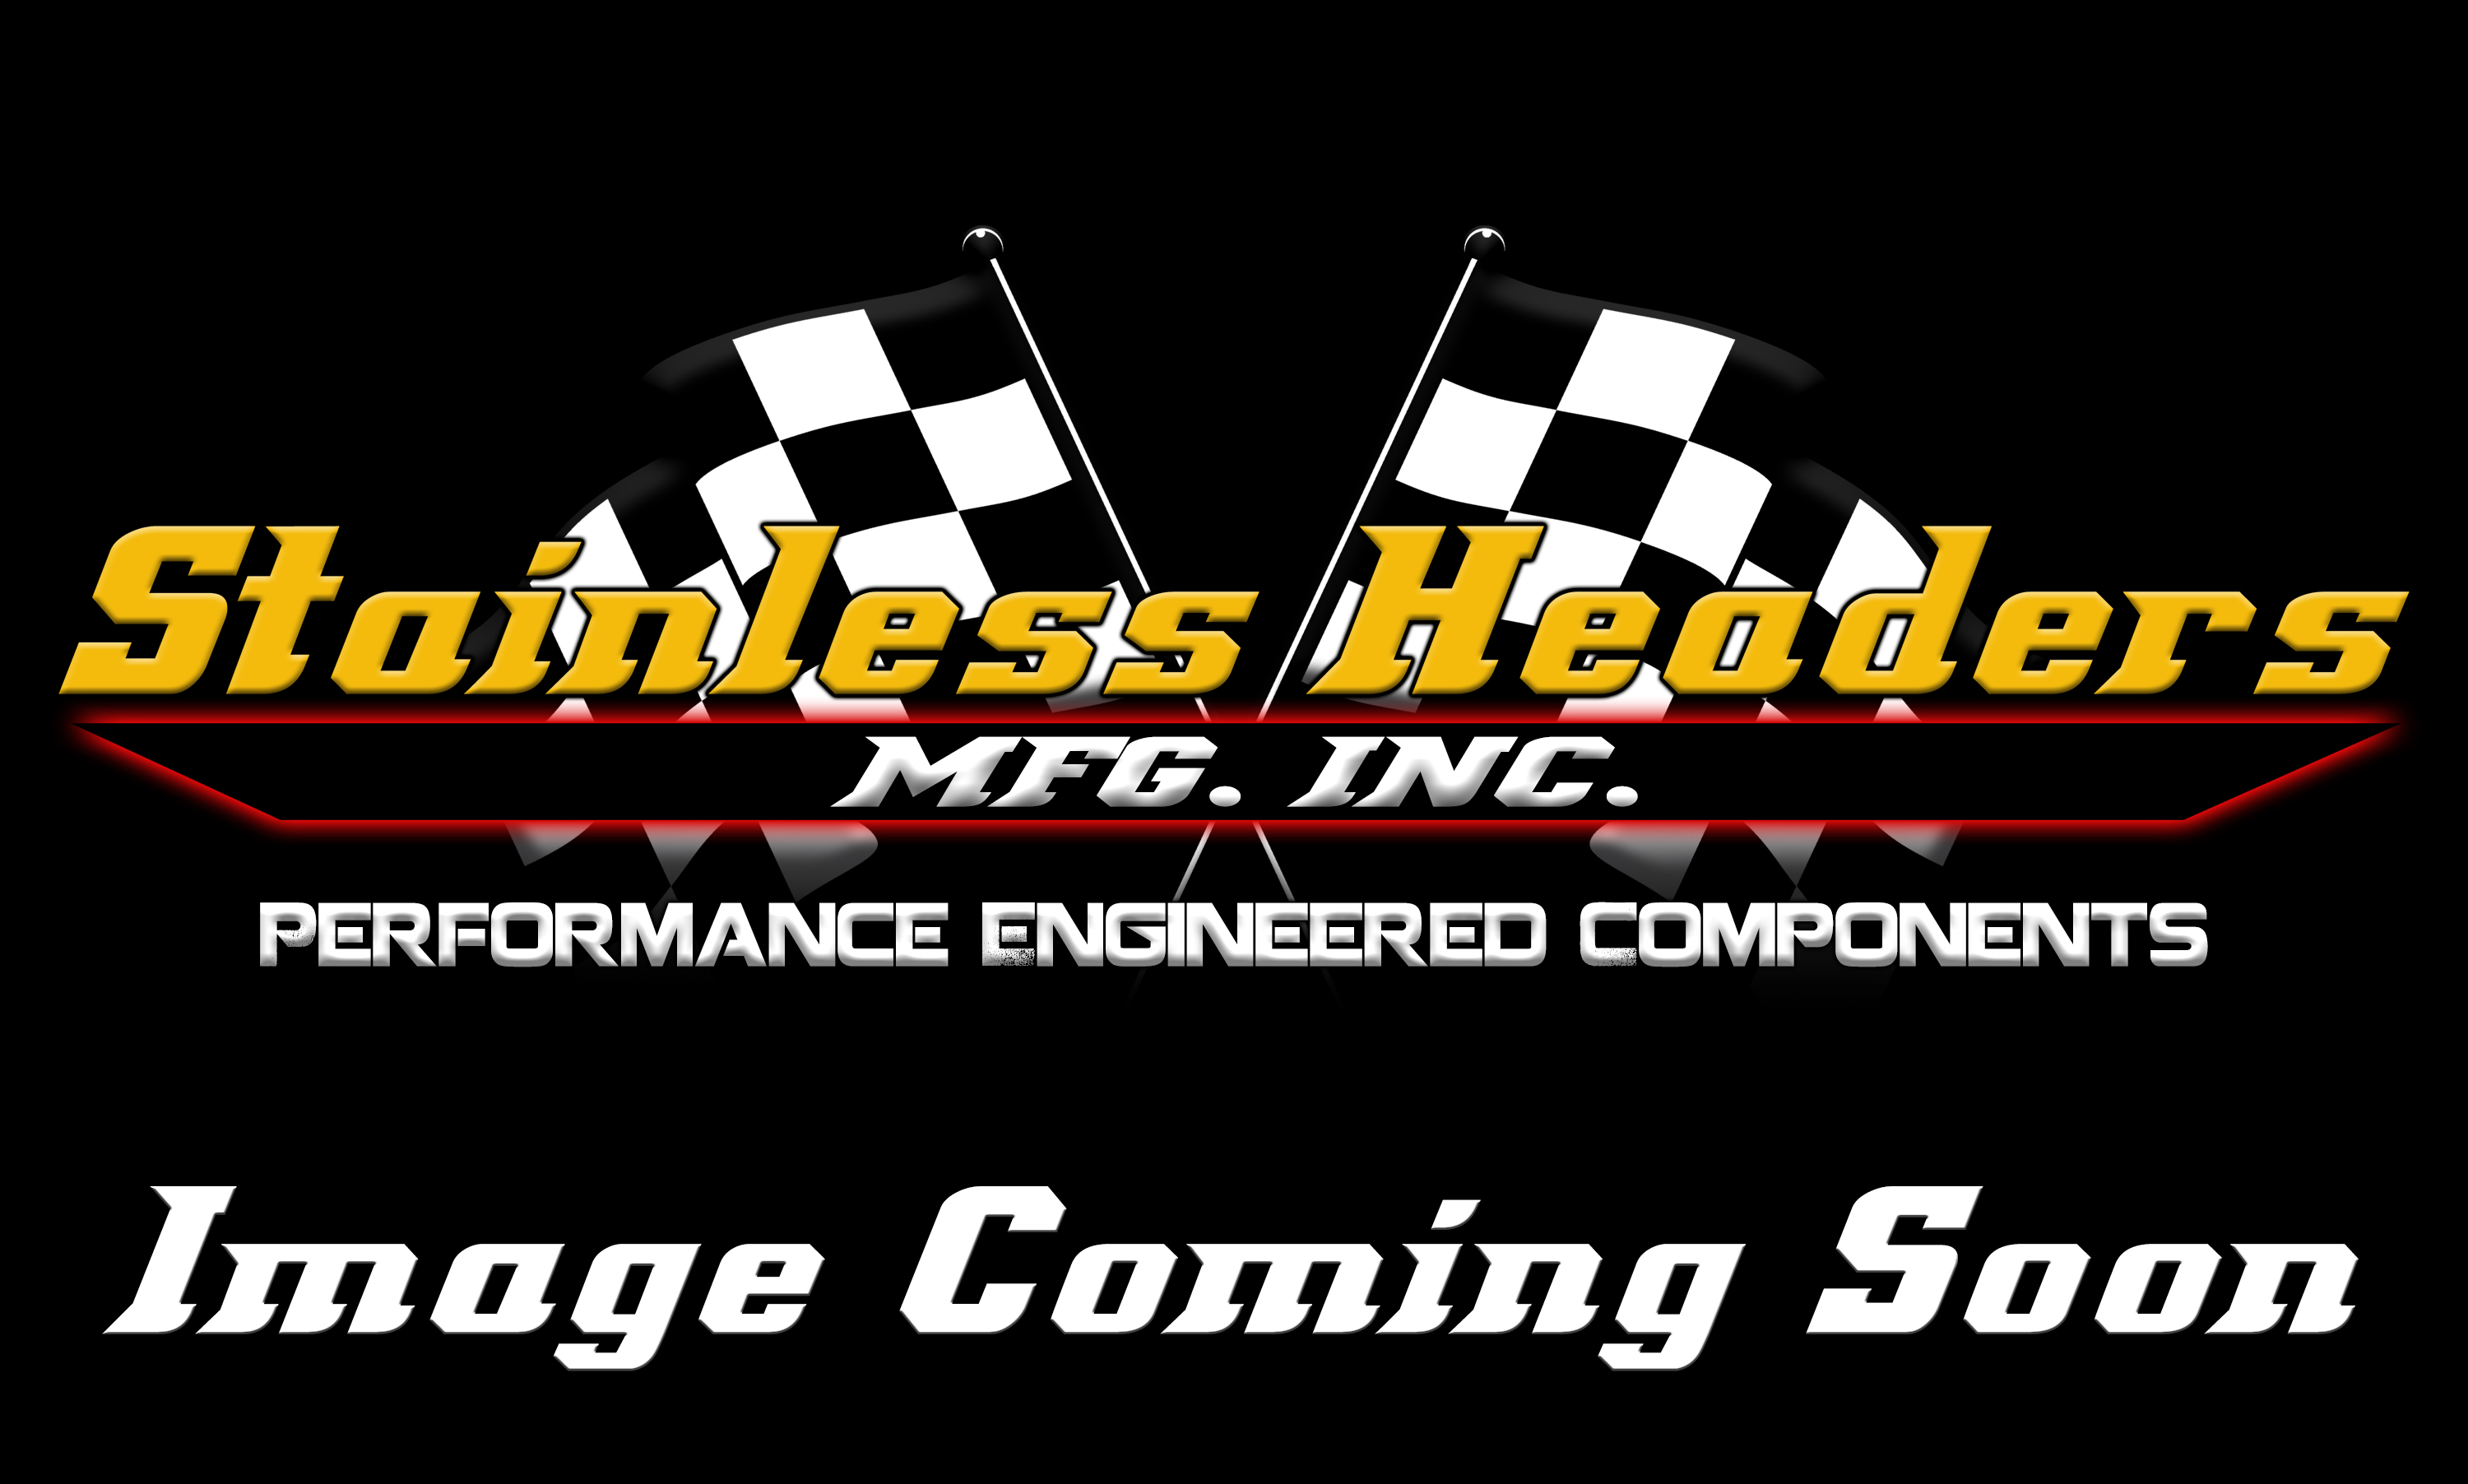 Stainless Headers - 18 Degree Small Block Chevy Turbo Manifold Build Kit - Image 7